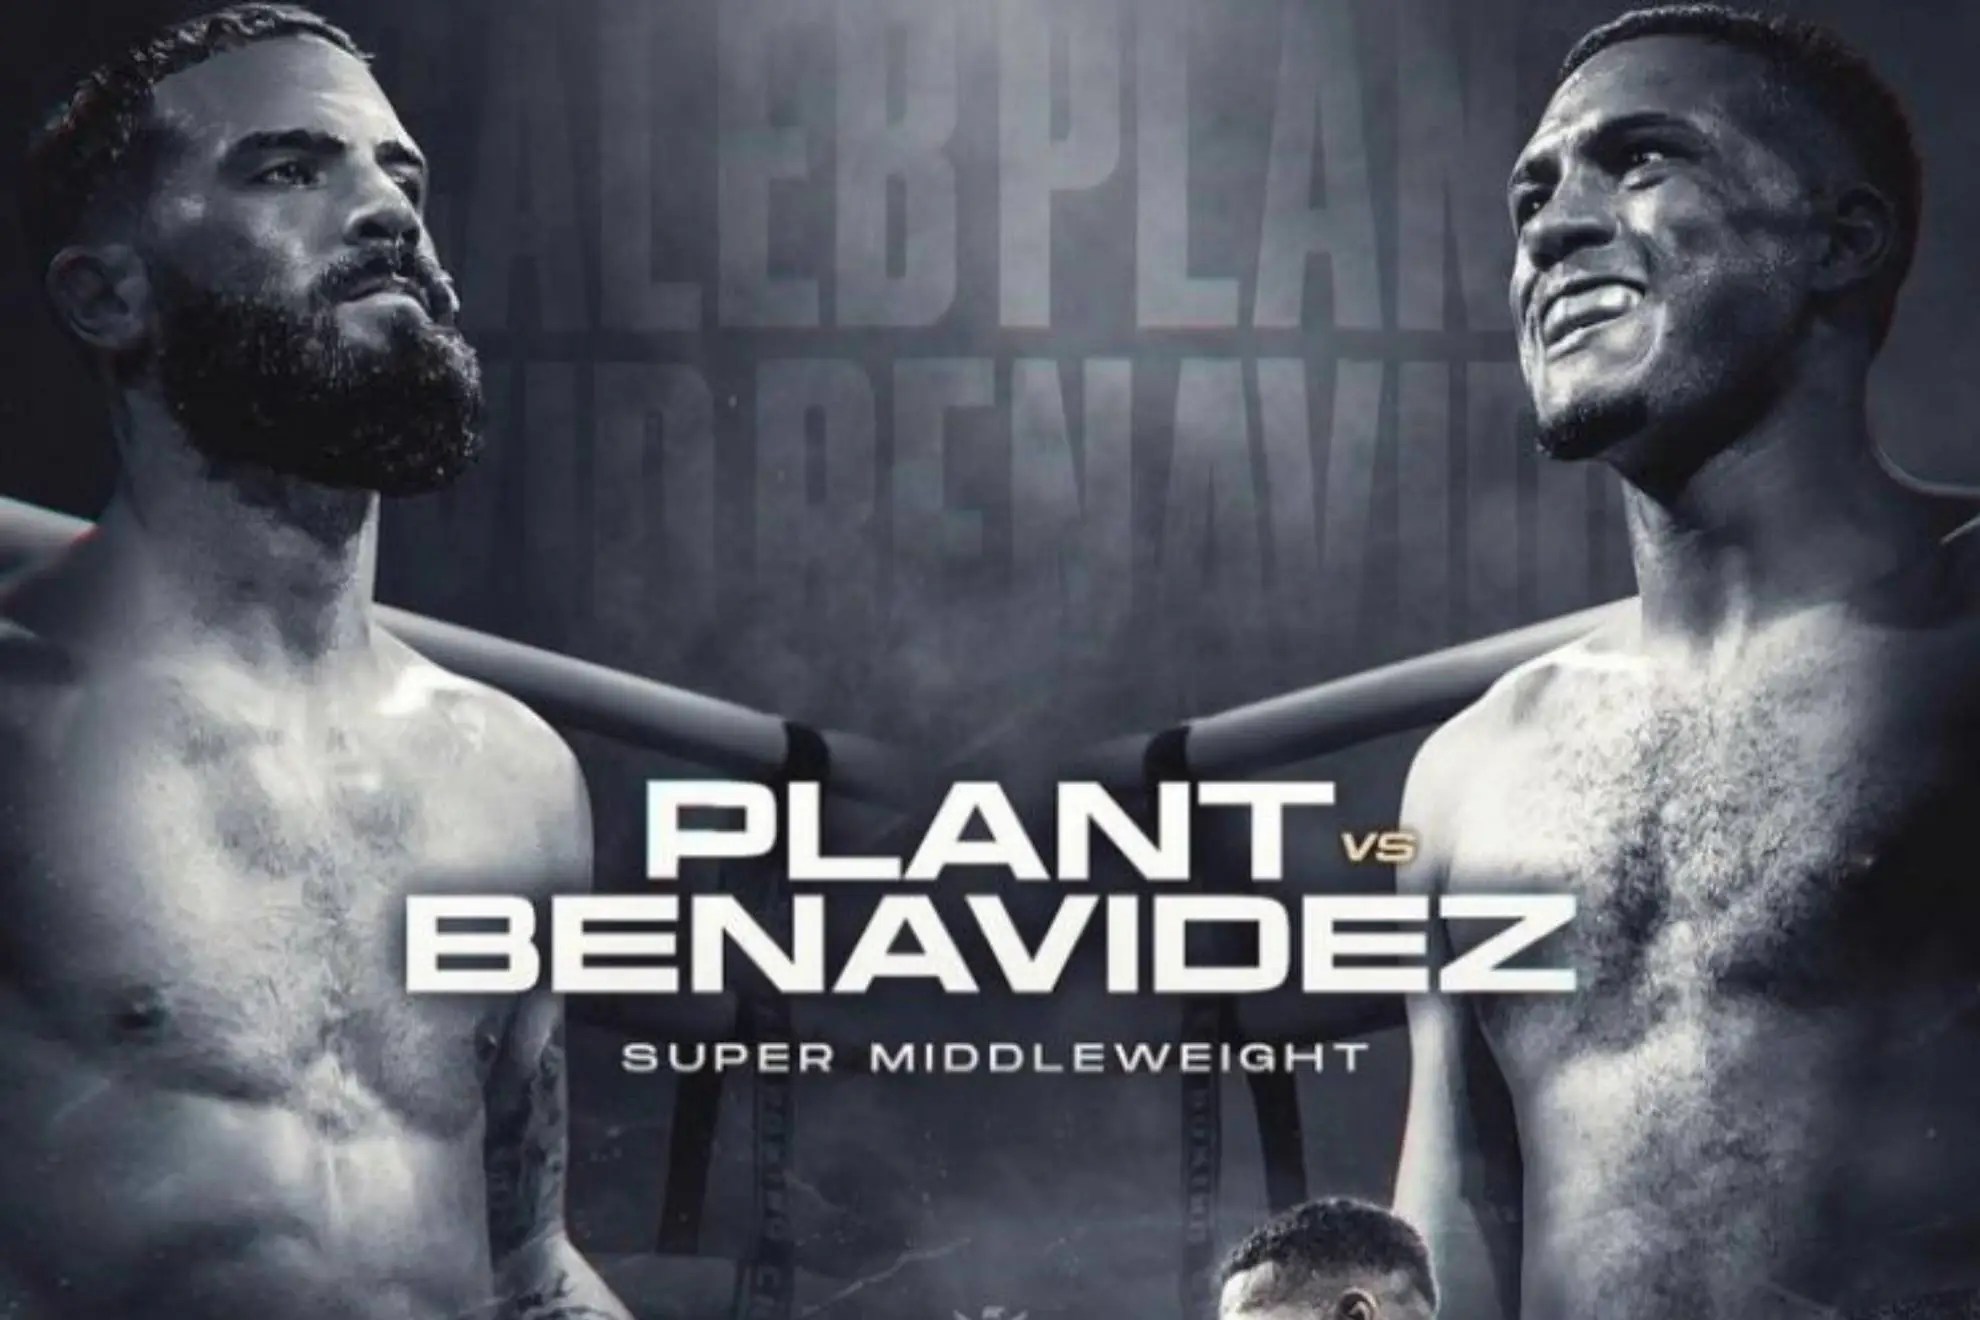 Boxing Schedule: David Benavidez vs Caleb Plant- Press conference, Weigh-ins date, Fight date and more